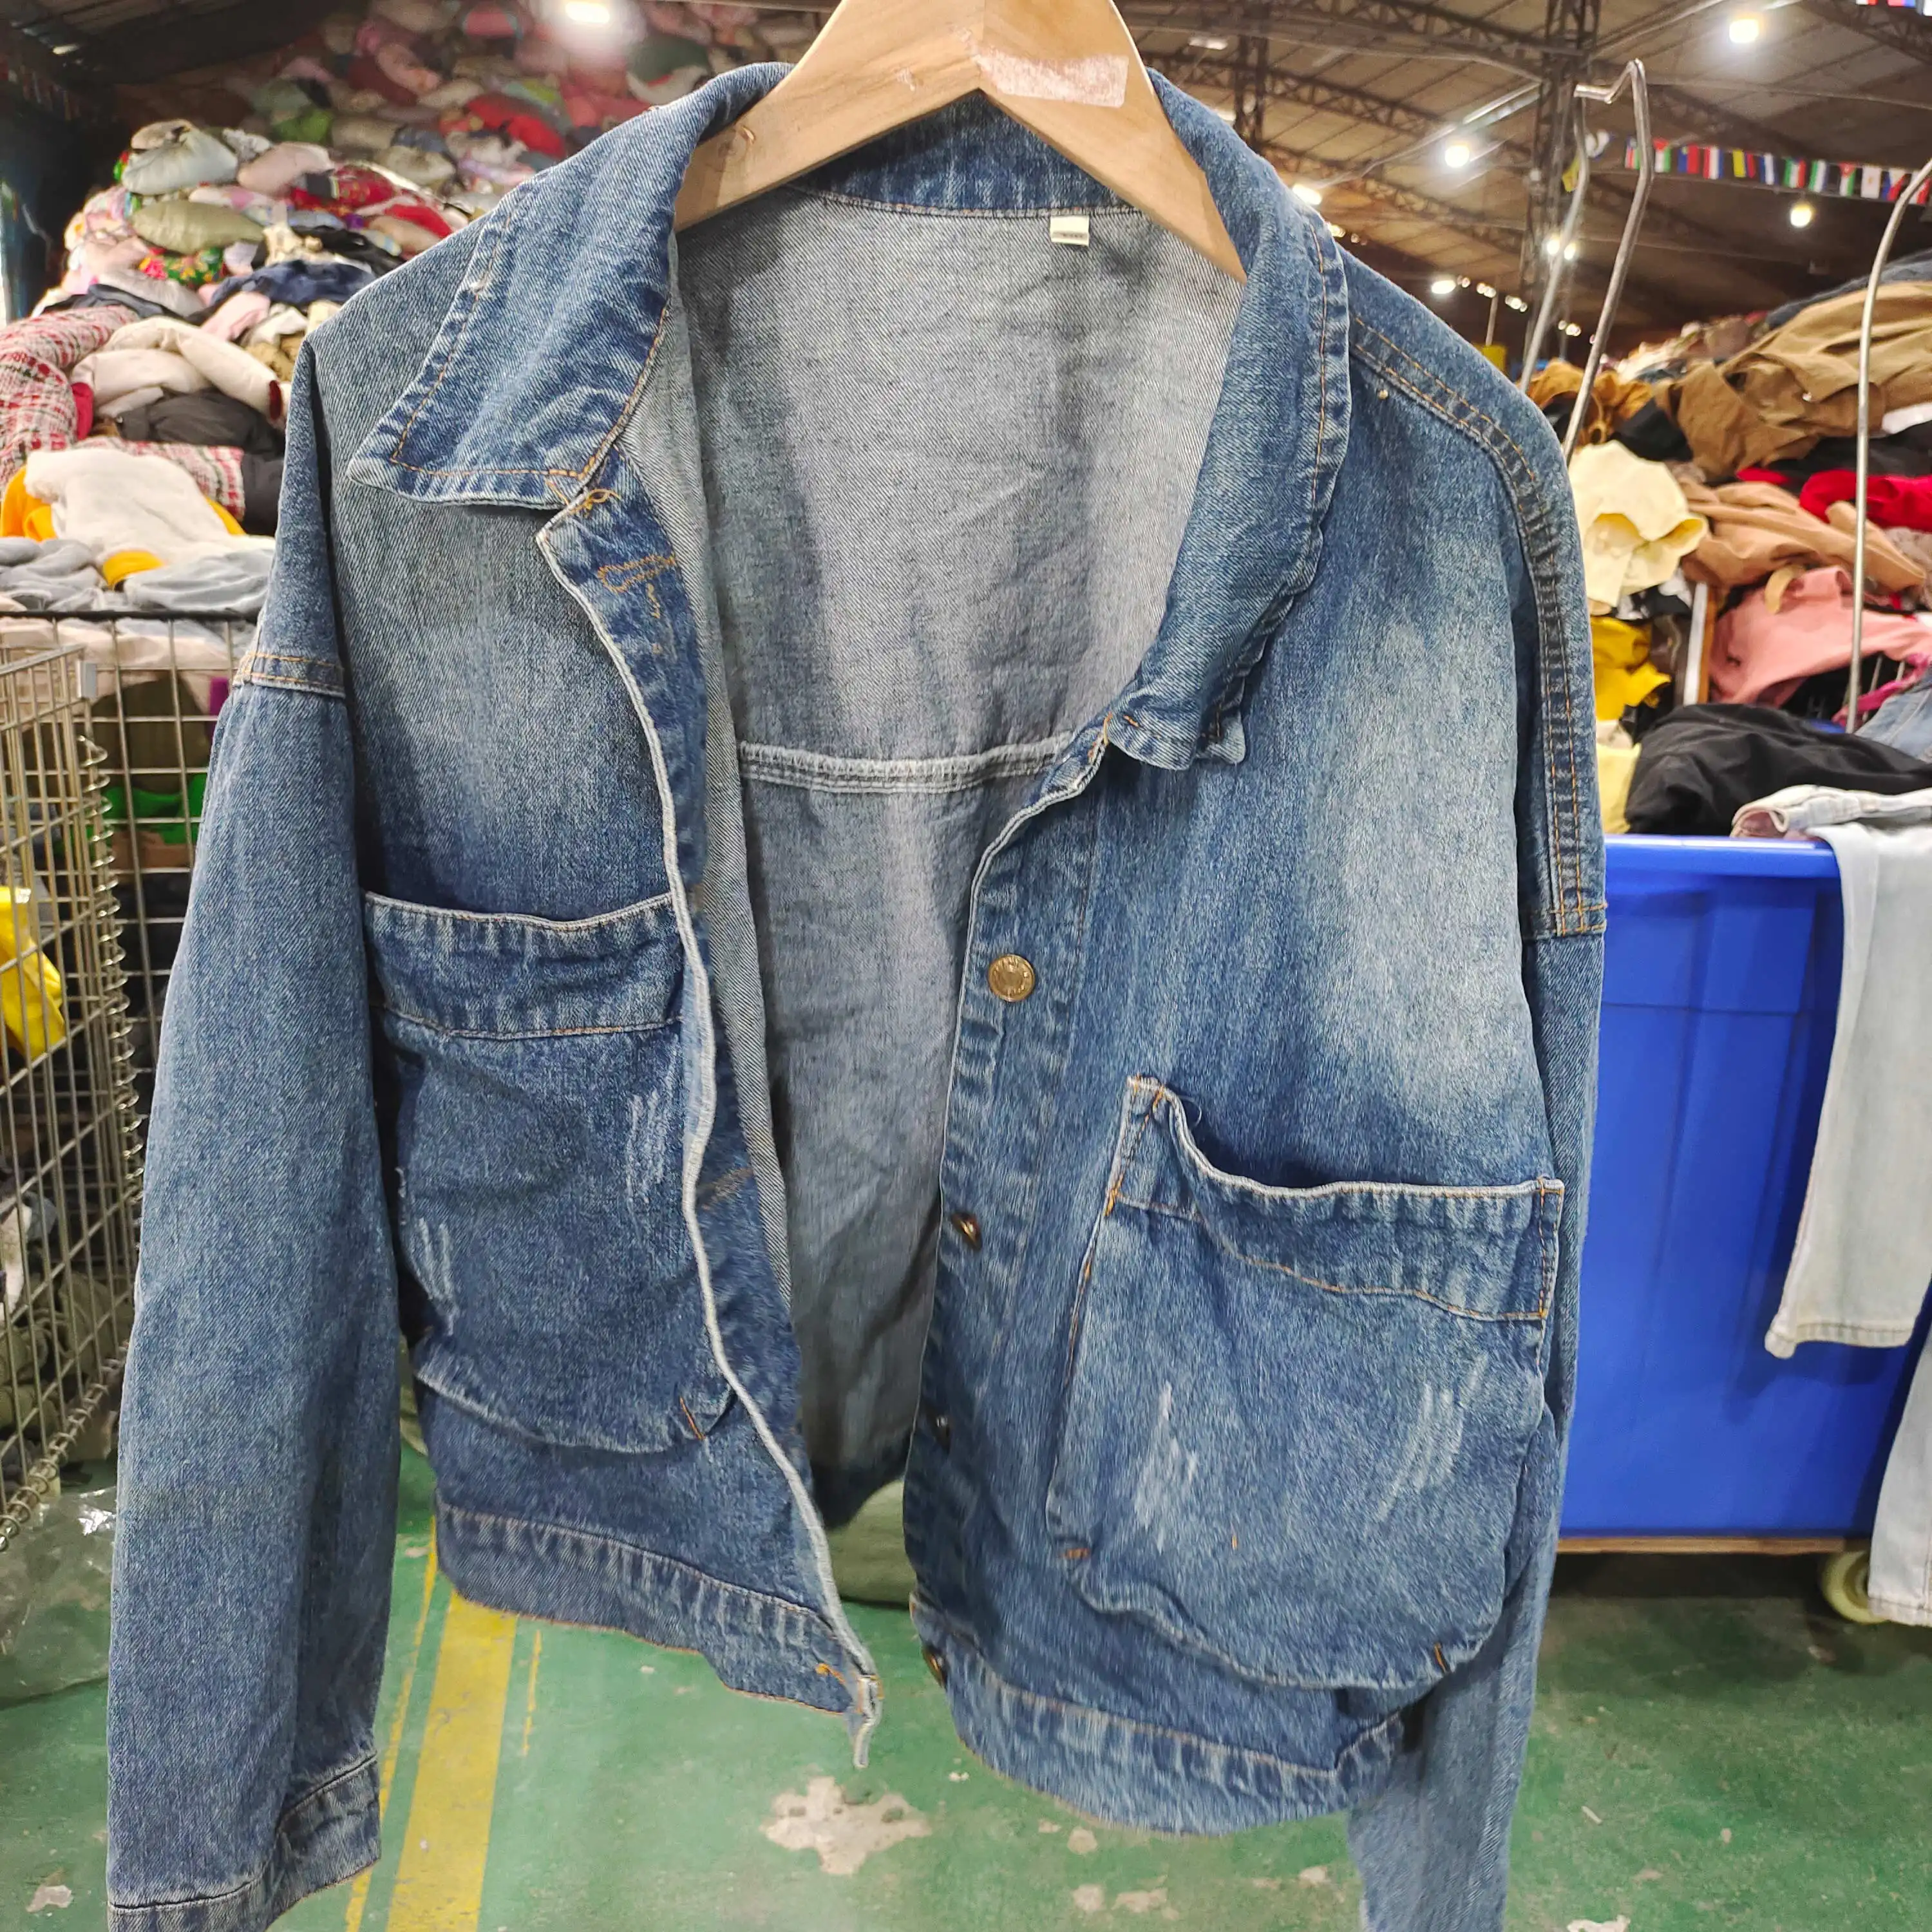 Alibaba-Online-Shopping-Website bales used wholesale used denim jackets used denim jacket bale